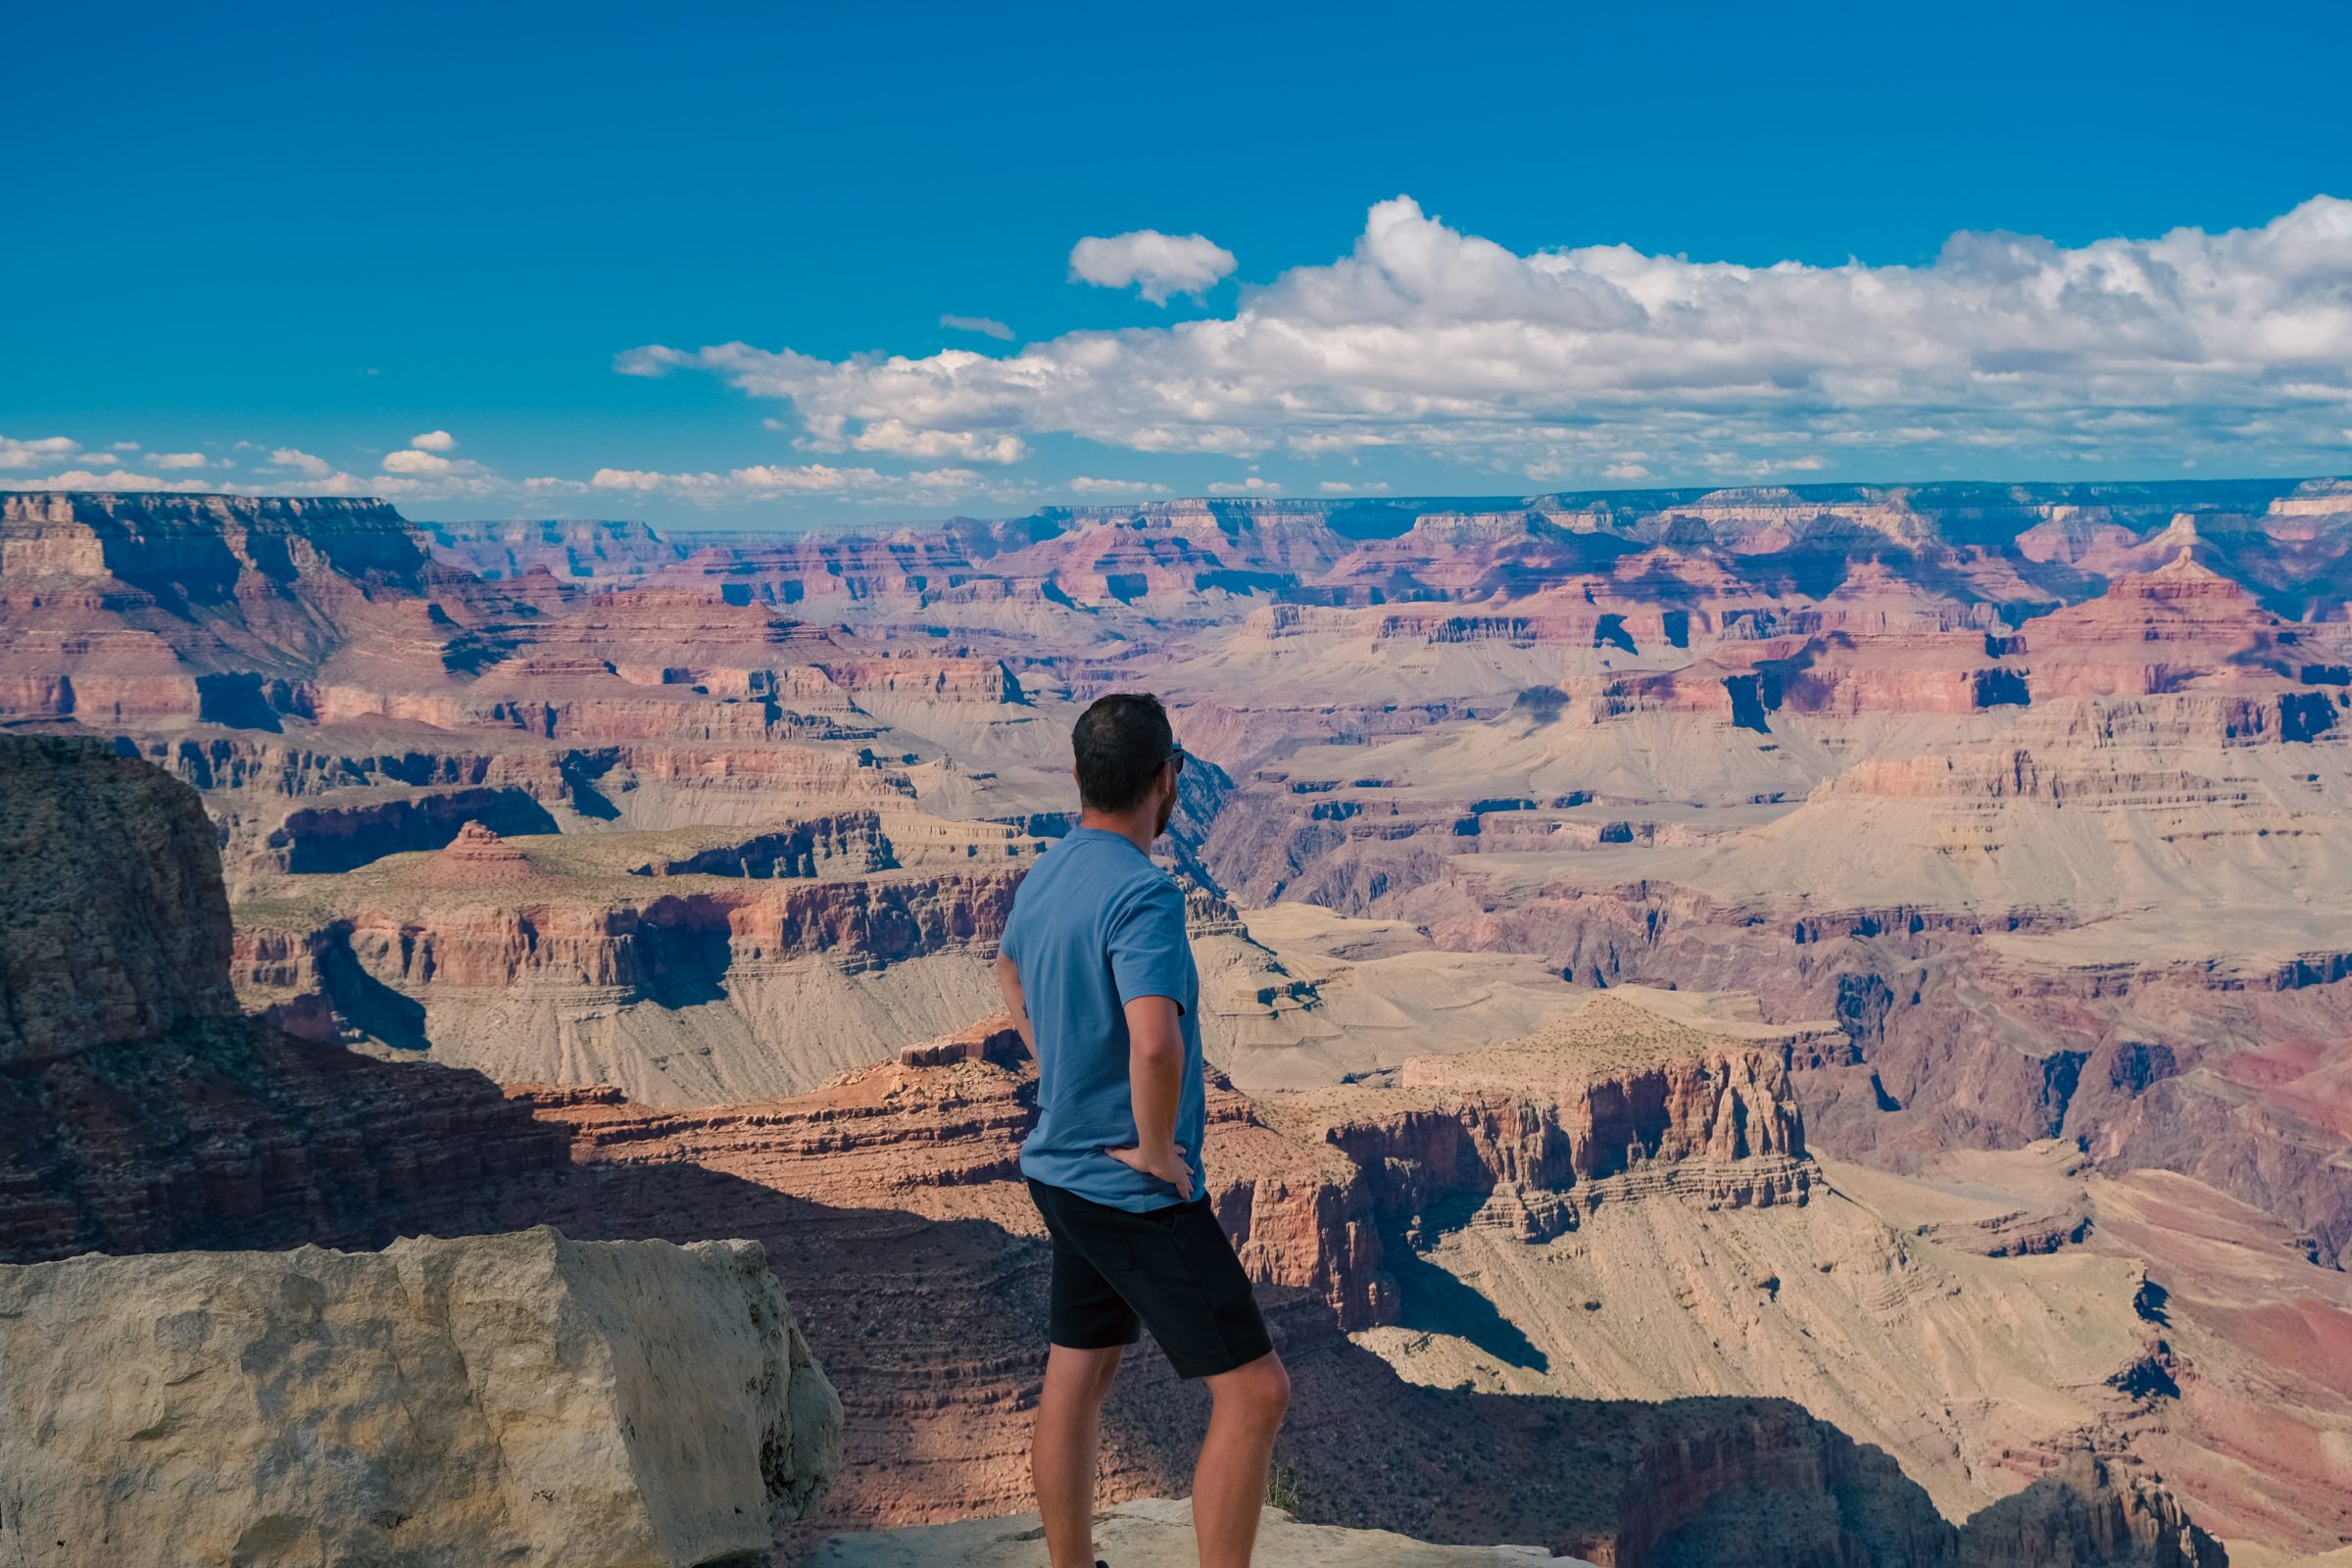 Chris in Grand Canyon National Park